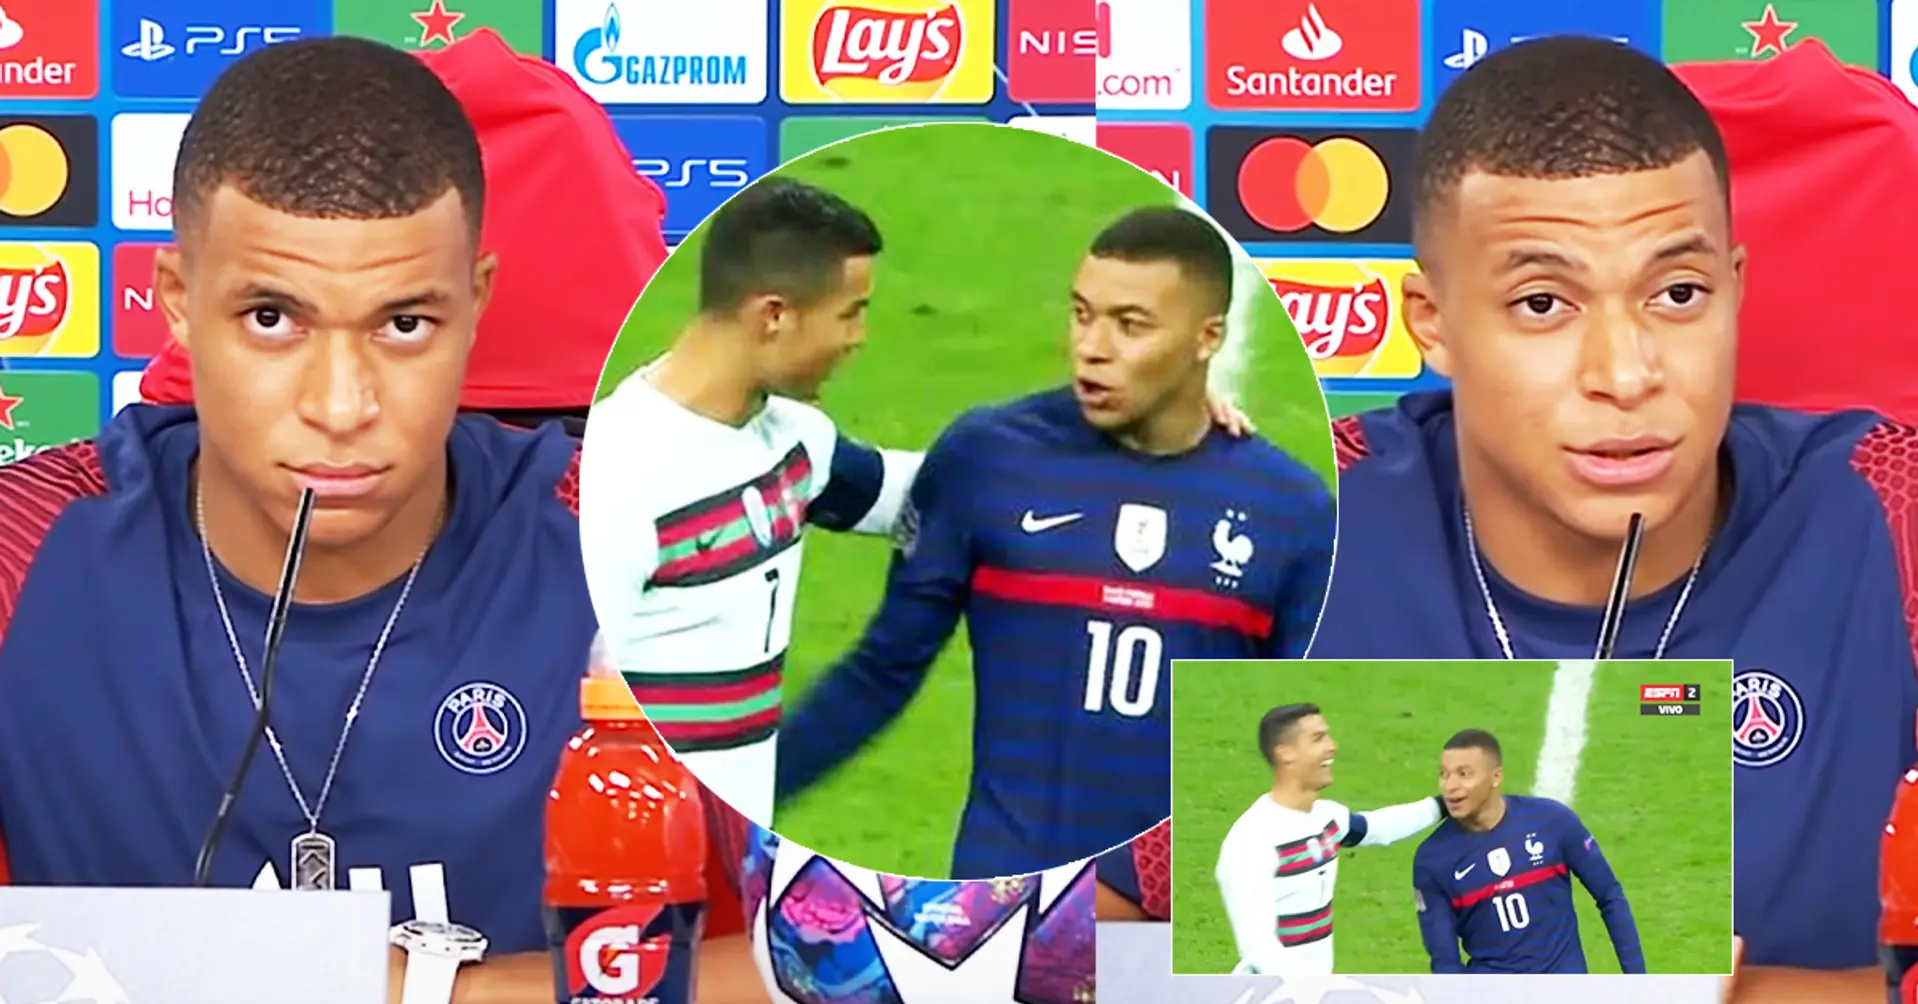 Kylian Mbappe asked about his 'ego', provides incredible response that proves he has elite 'CR7 mentality'